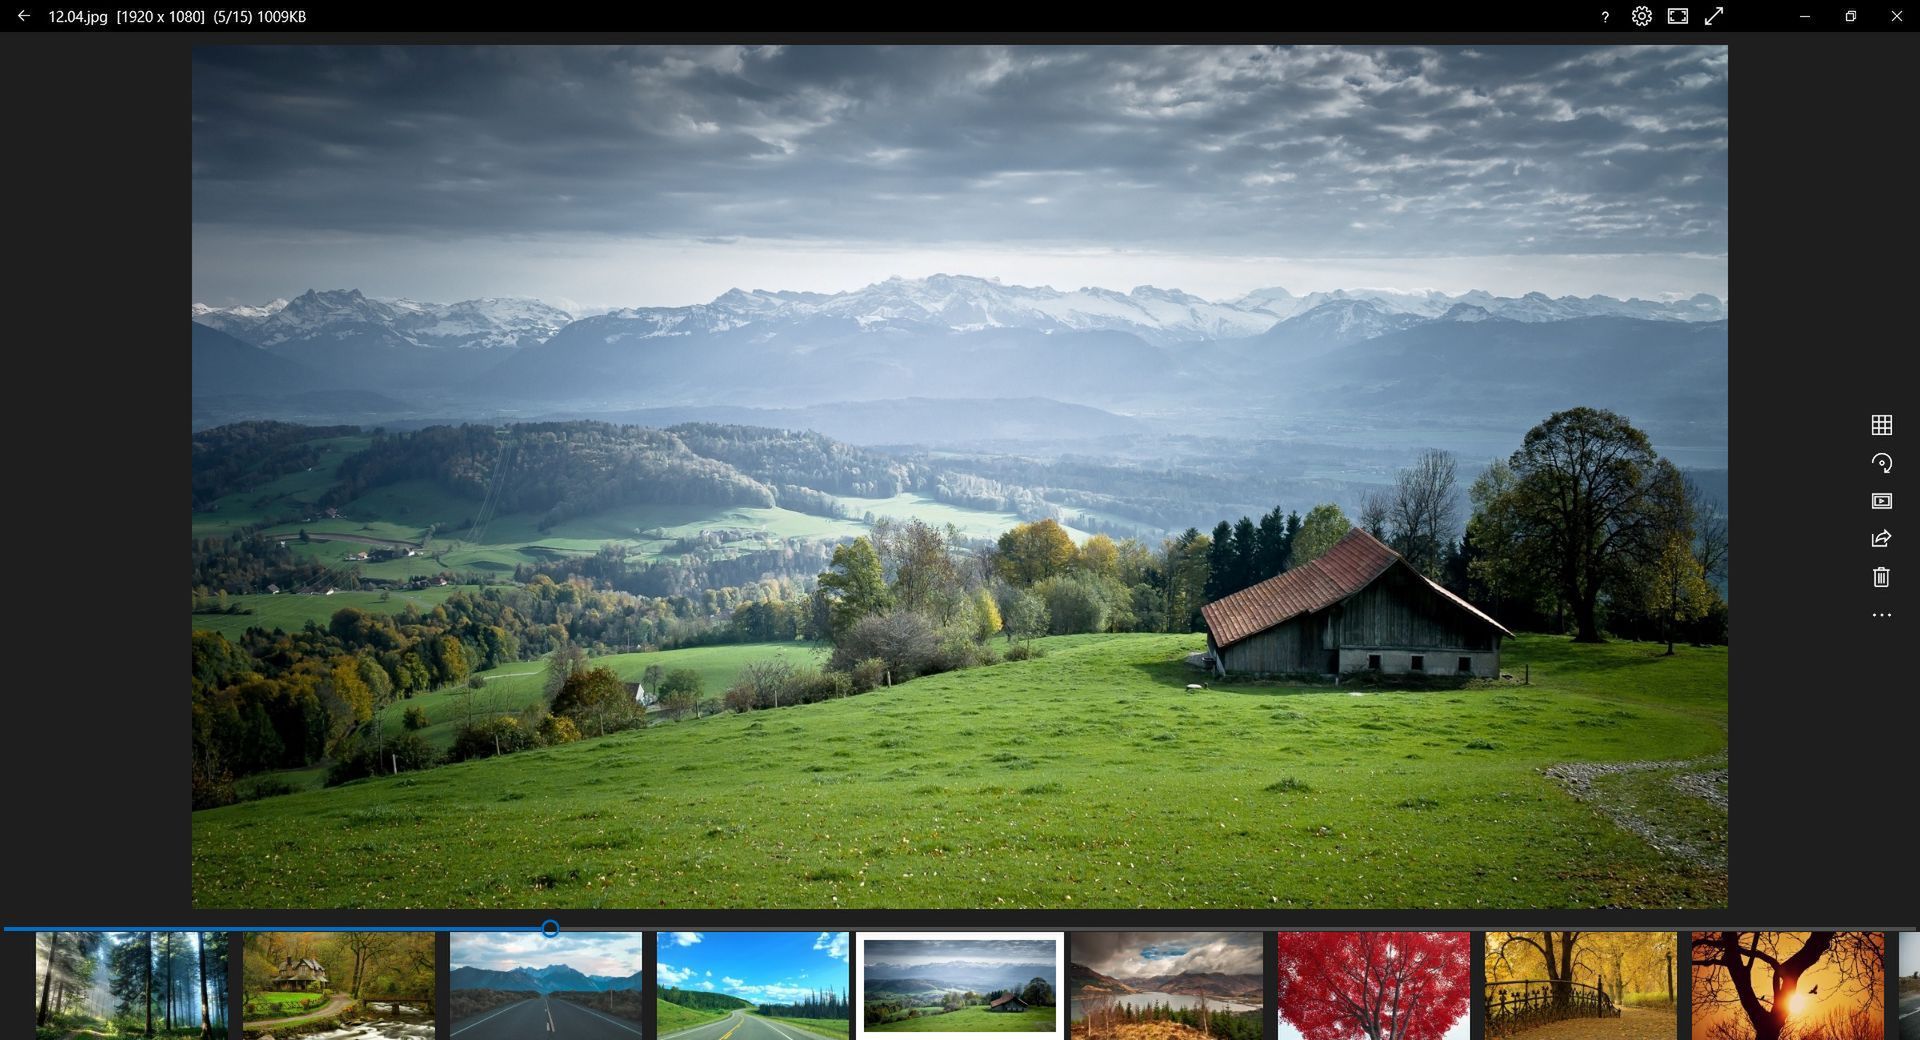 123 photo viewer review